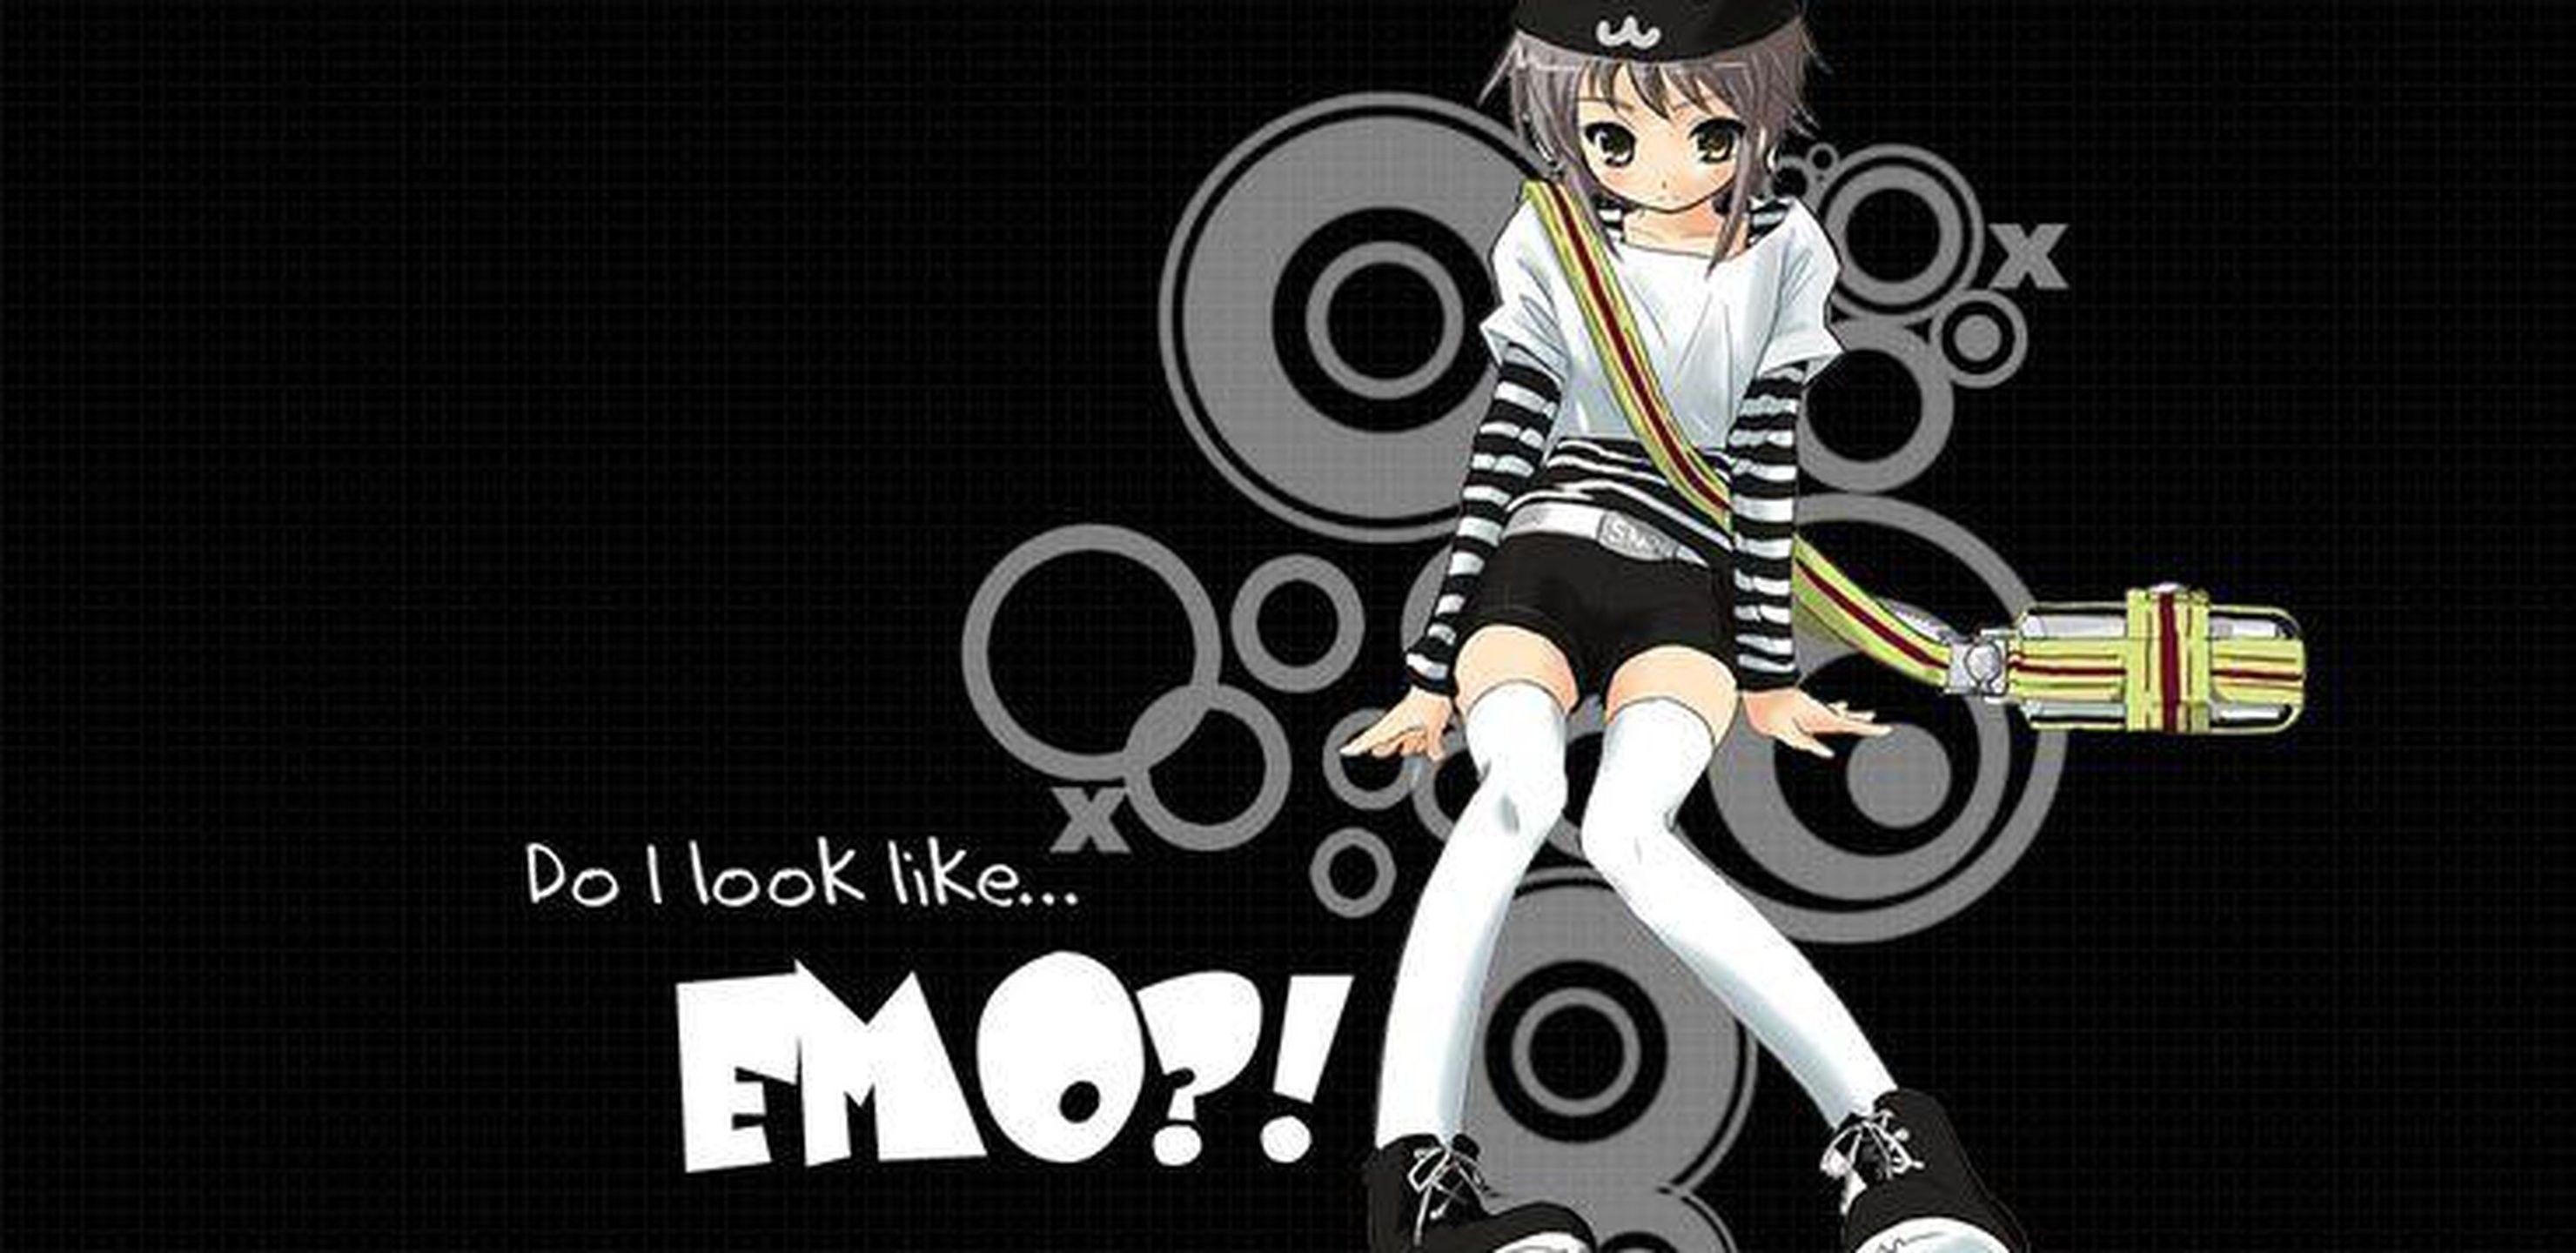 20 Choices emo wallpaper aesthetic anime You Can Download It For Free ...